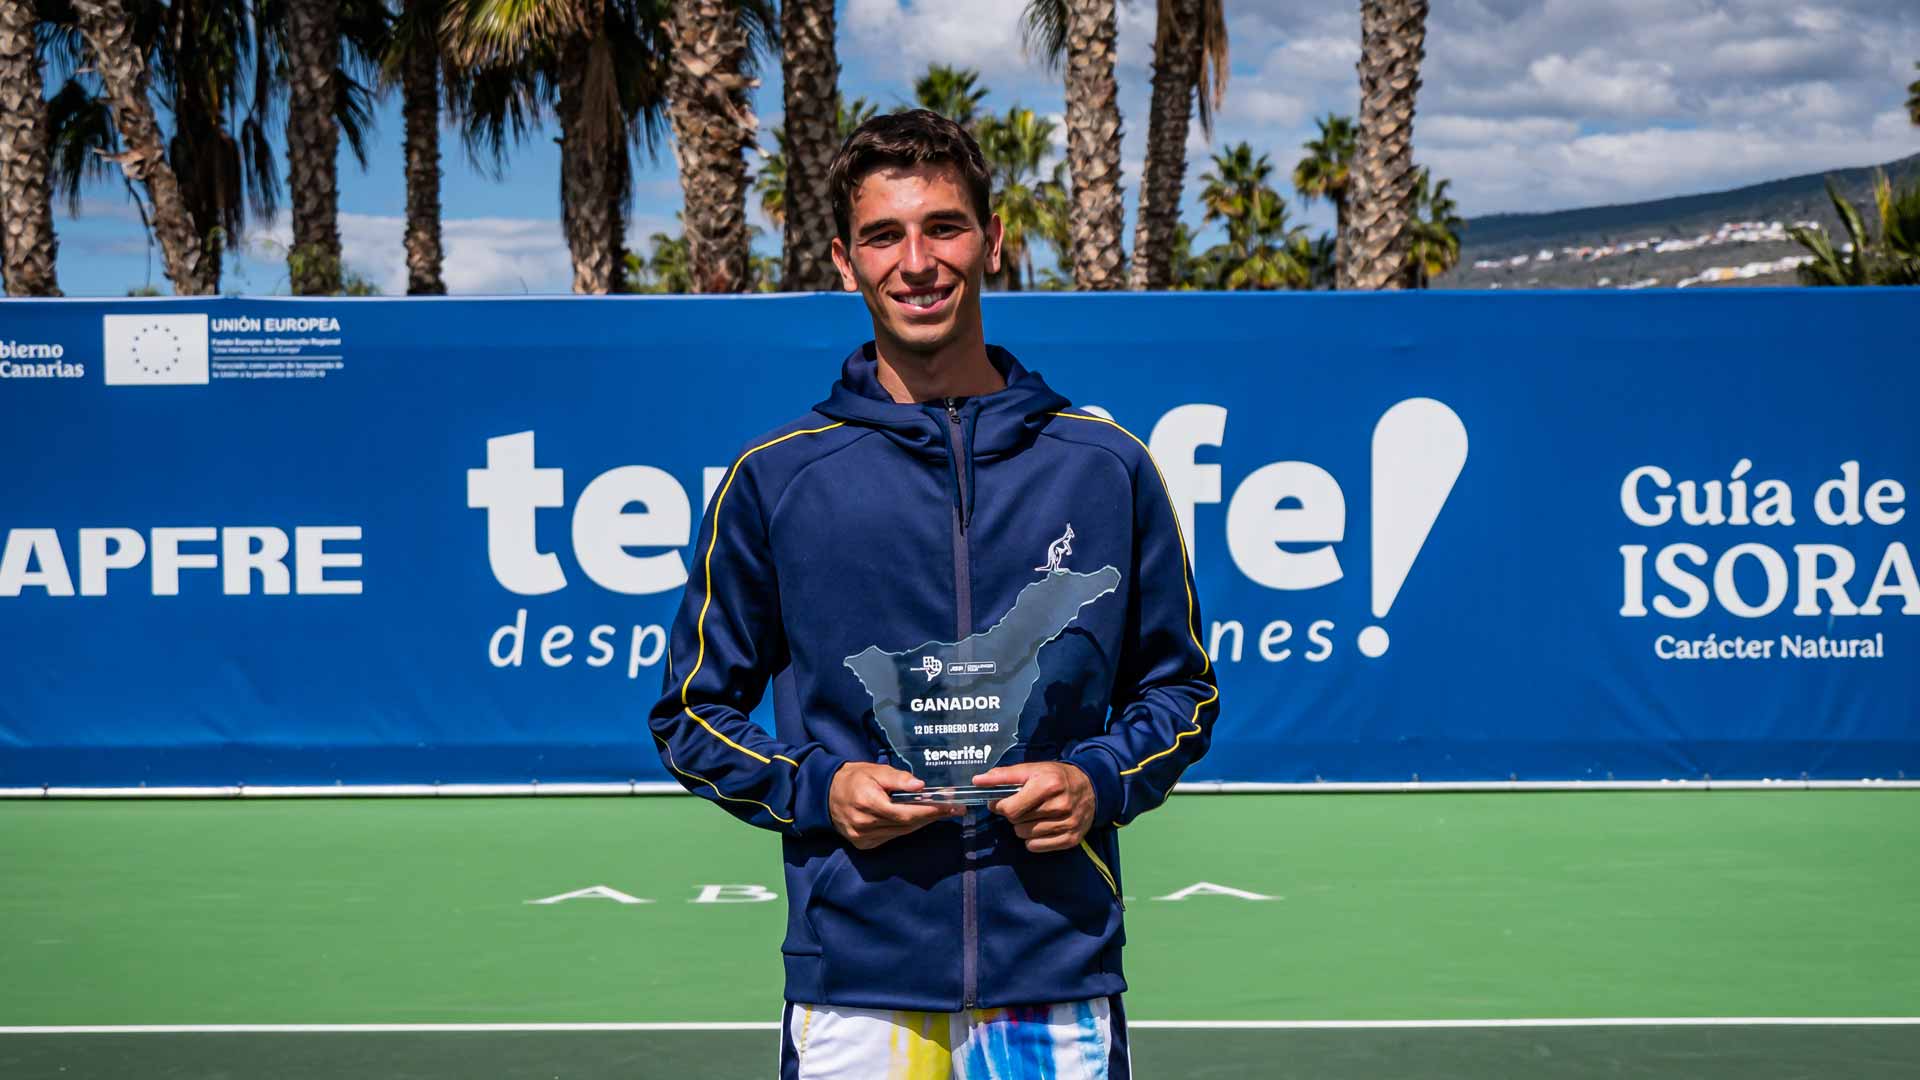 <a href='https://www.atptour.com/en/players/matteo-gigante/g0gd/overview'>Matteo Gigante</a> claims the Challenger 75 event in Tenerife.